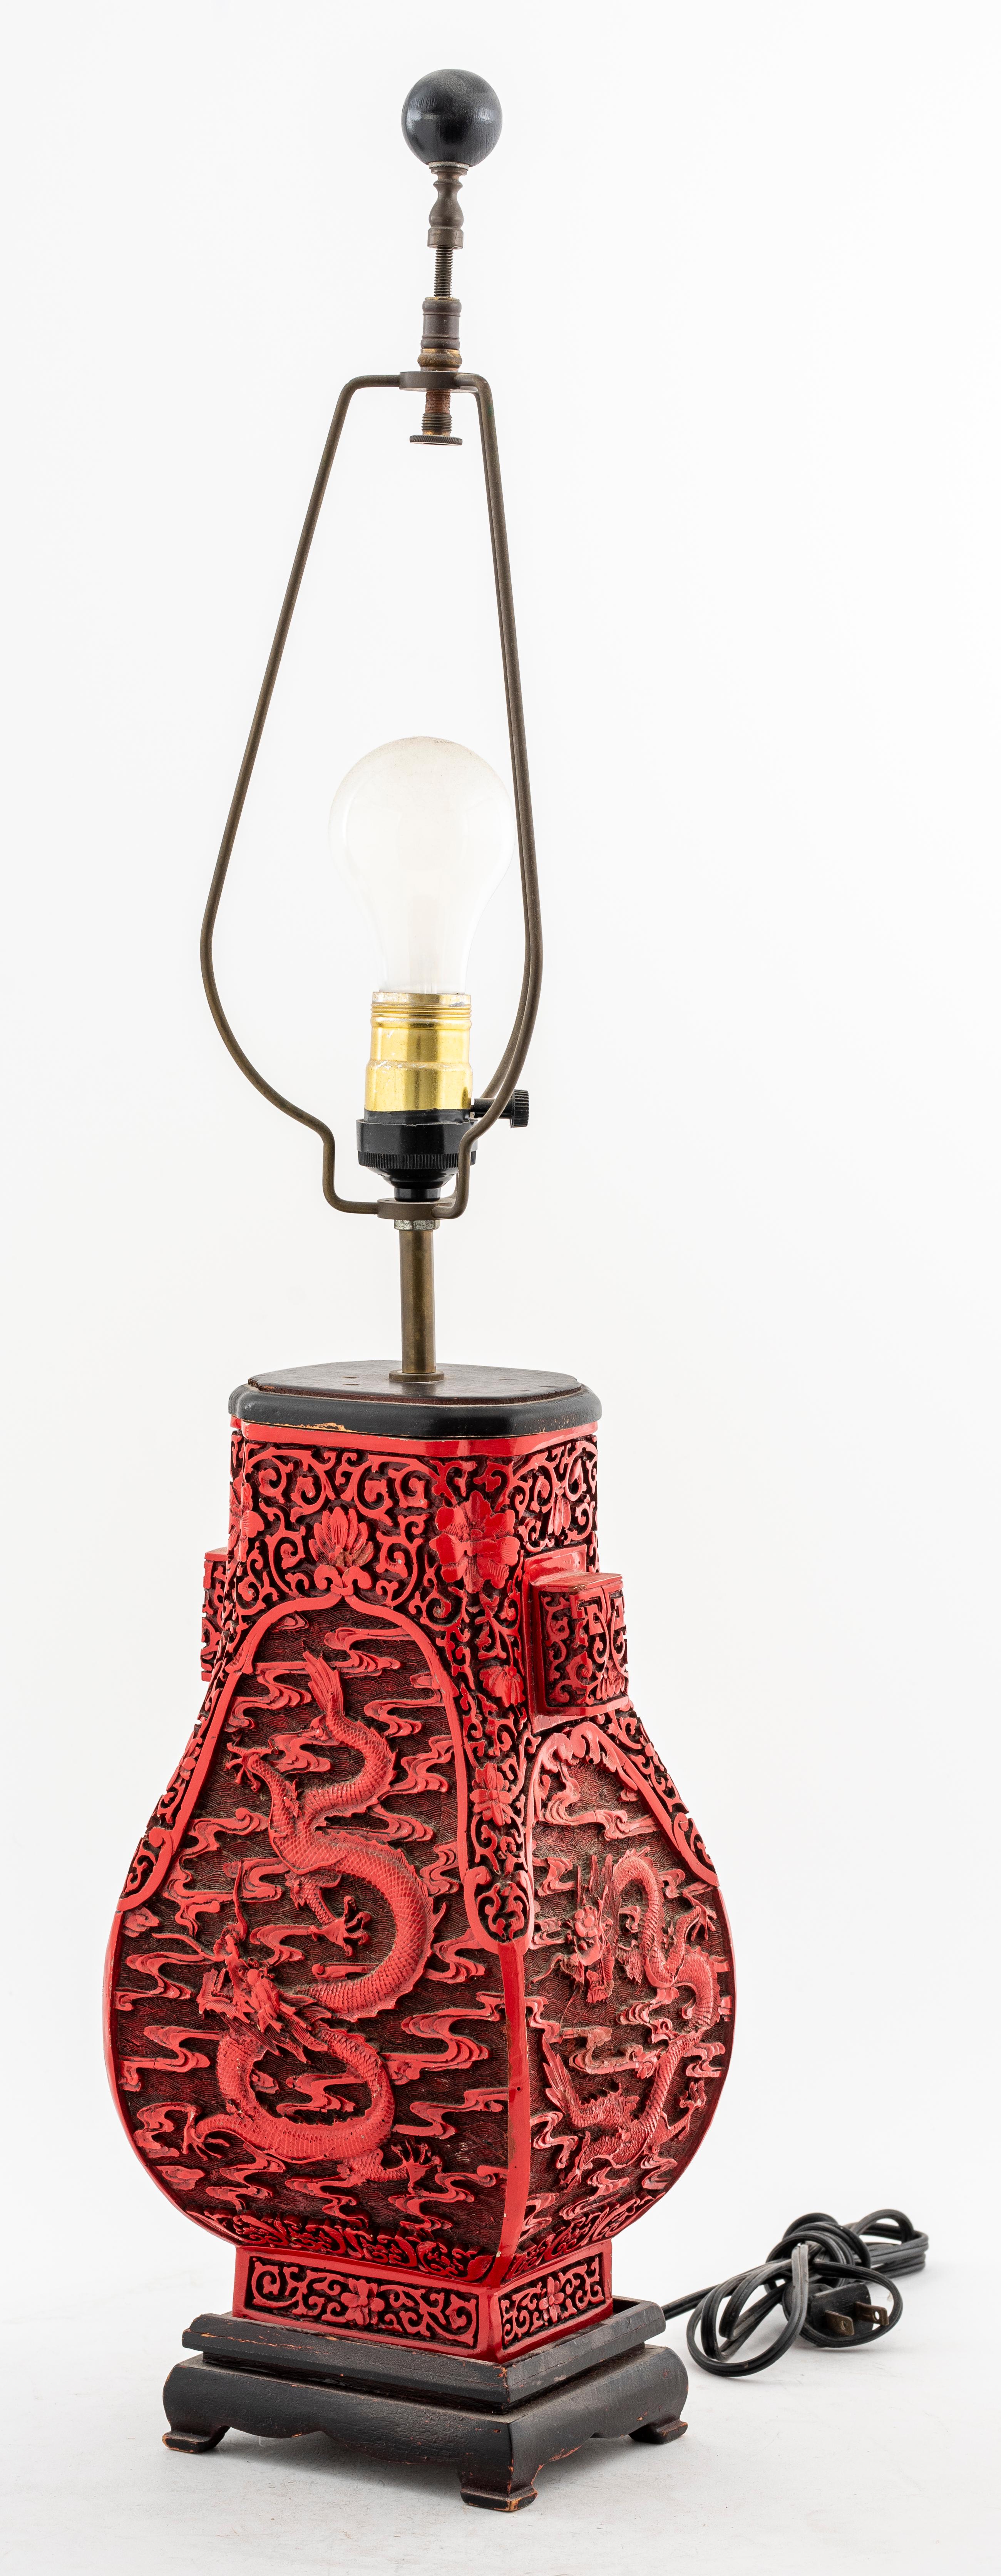 Chinese cinnabar lamp with a dragon motif & floral design, on a wooden base.